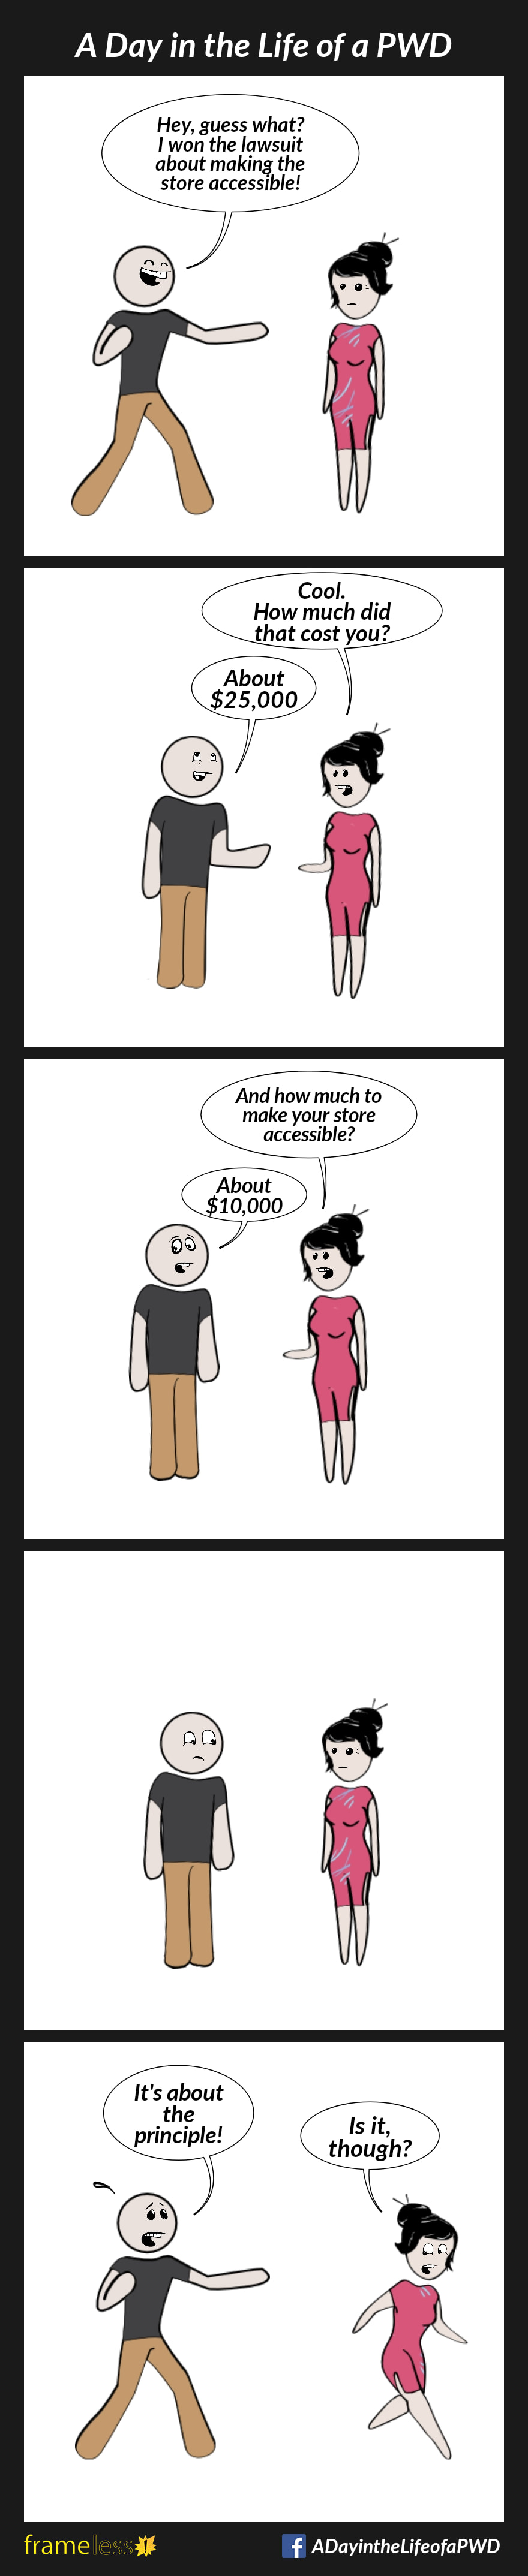 COMIC STRIP 
A Day in the Life of a PWD (Person With a Disability) 

Frame 1:
A woman is approached by a man.
MAN: Hey, guess what? I won the lawsuit about making the store accessible!

Frame 2:
WOMAN: Cool. How much did that cost you?
MAN: About $25,000

Frame 3:
WOMAN: And how much to make your store accessible?
MAN: About $10,000

Frame 4:
The woman stares at the man in uncomfortable silence

Frame 5:
MAN (desperately): It's about the principle!
WOMAN (walking away): Is it, though?